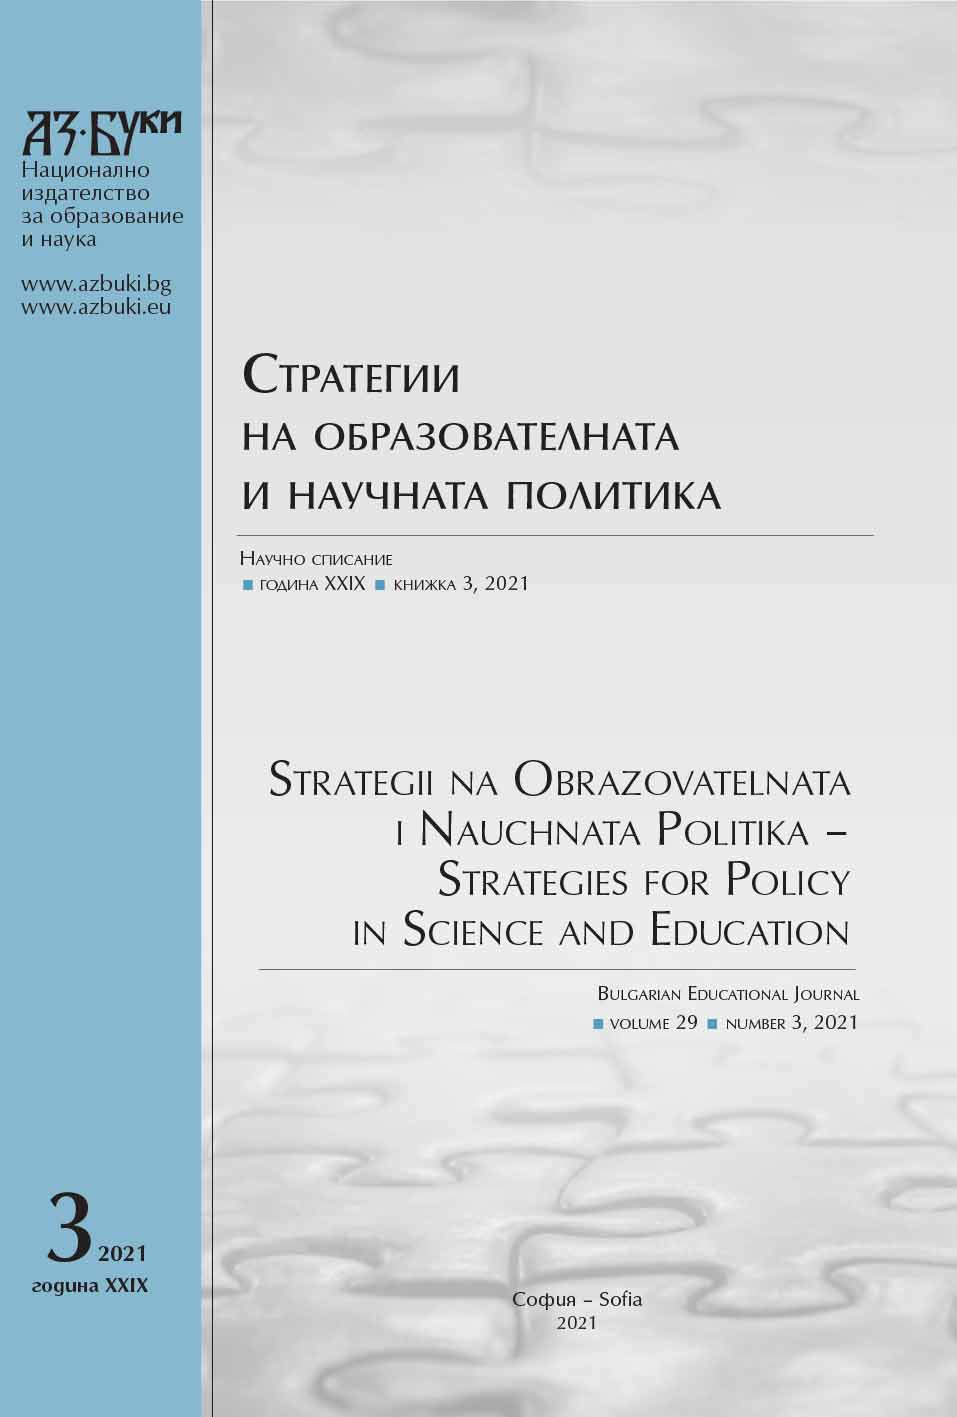 Individual Competencies of Teachers in the Process of Digitalization in Higher Education Cover Image